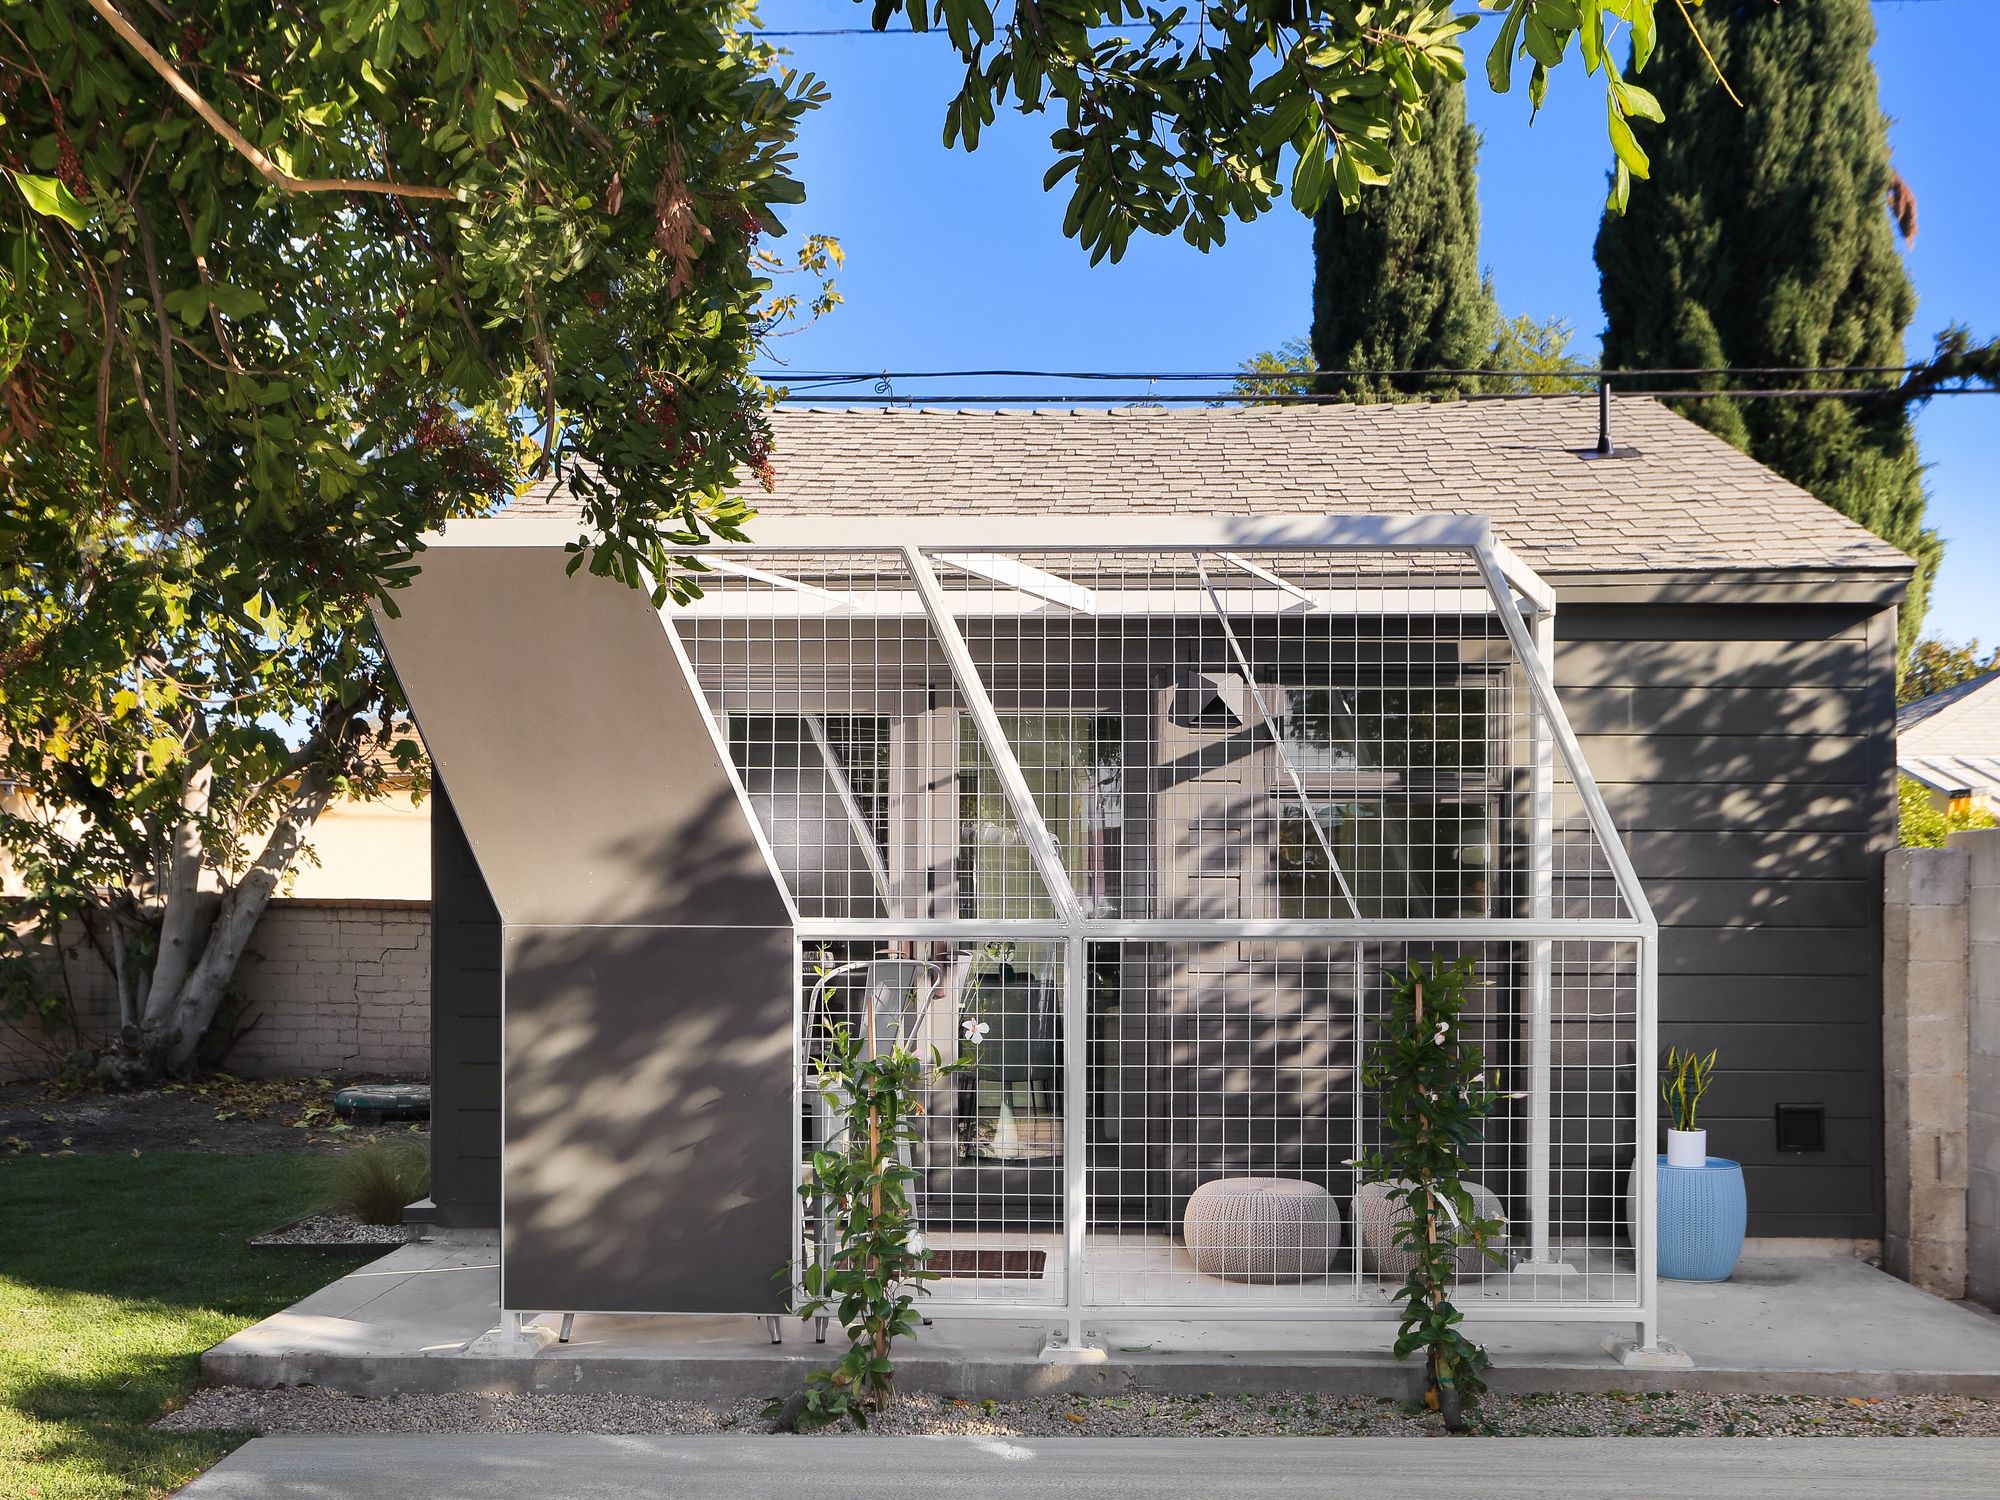 Culver City Startup United Dwelling Wants to Transform Your Unused Garage into Housing